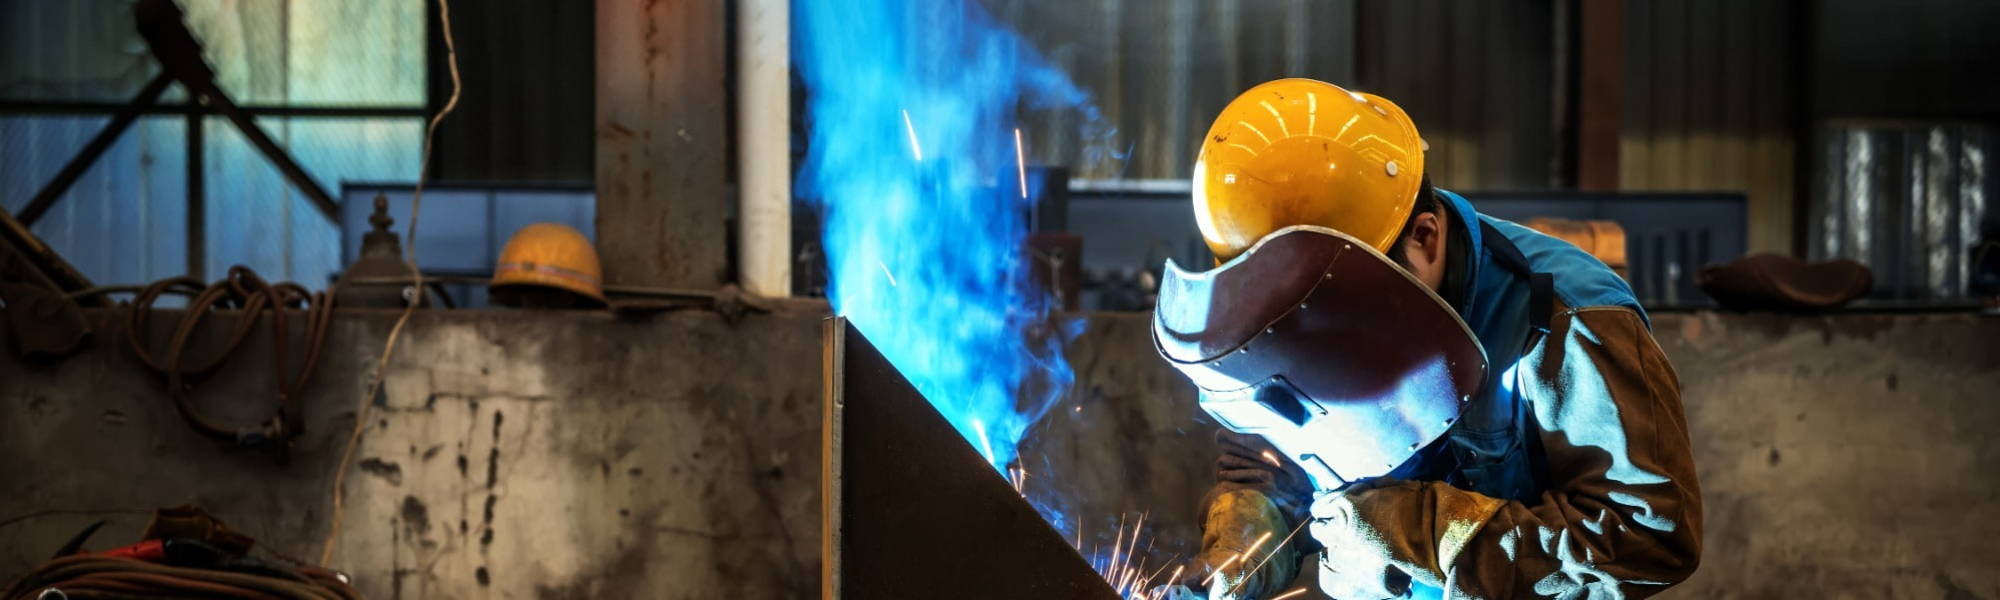 Man in yellow helmet welding metal with blue flame and smoke